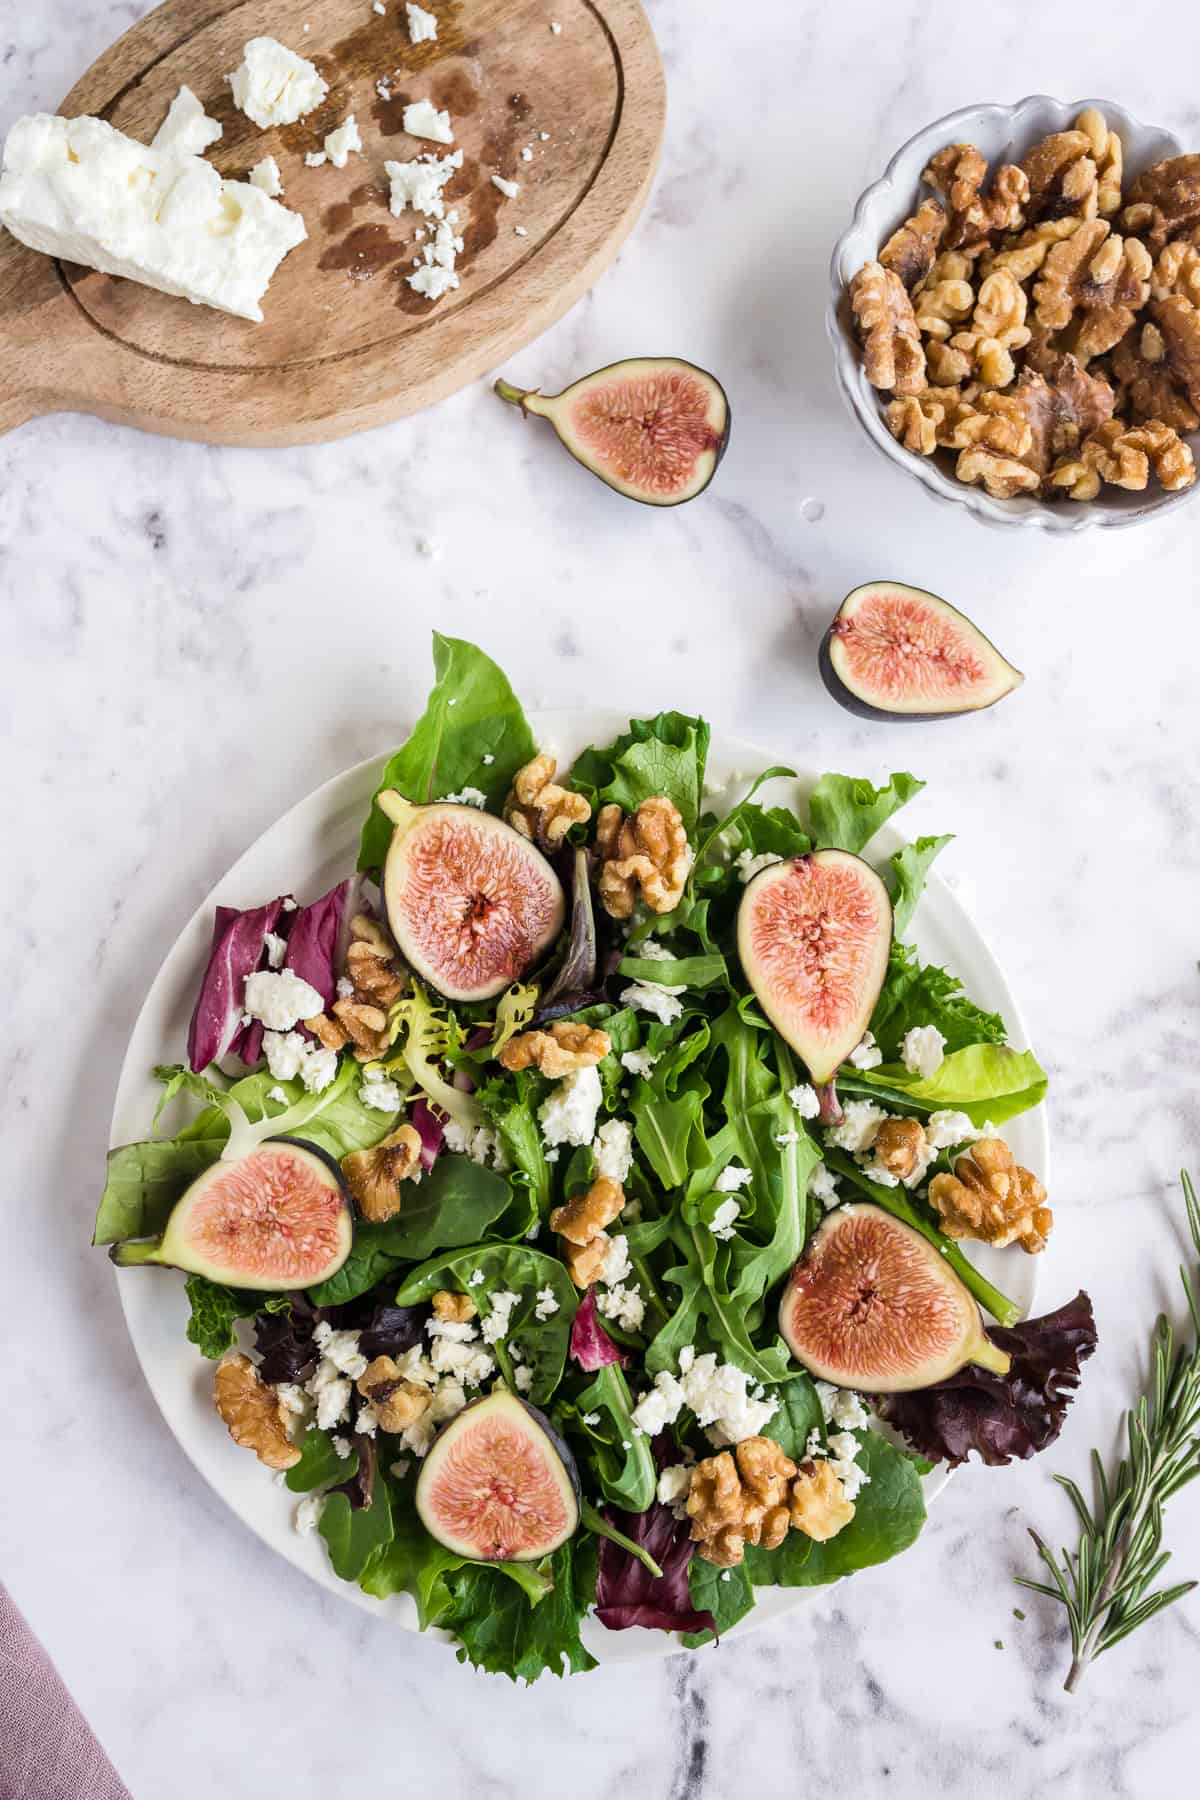 A salad with figs, walnuts and feta cheese on a white plate with extra ingredients around it.